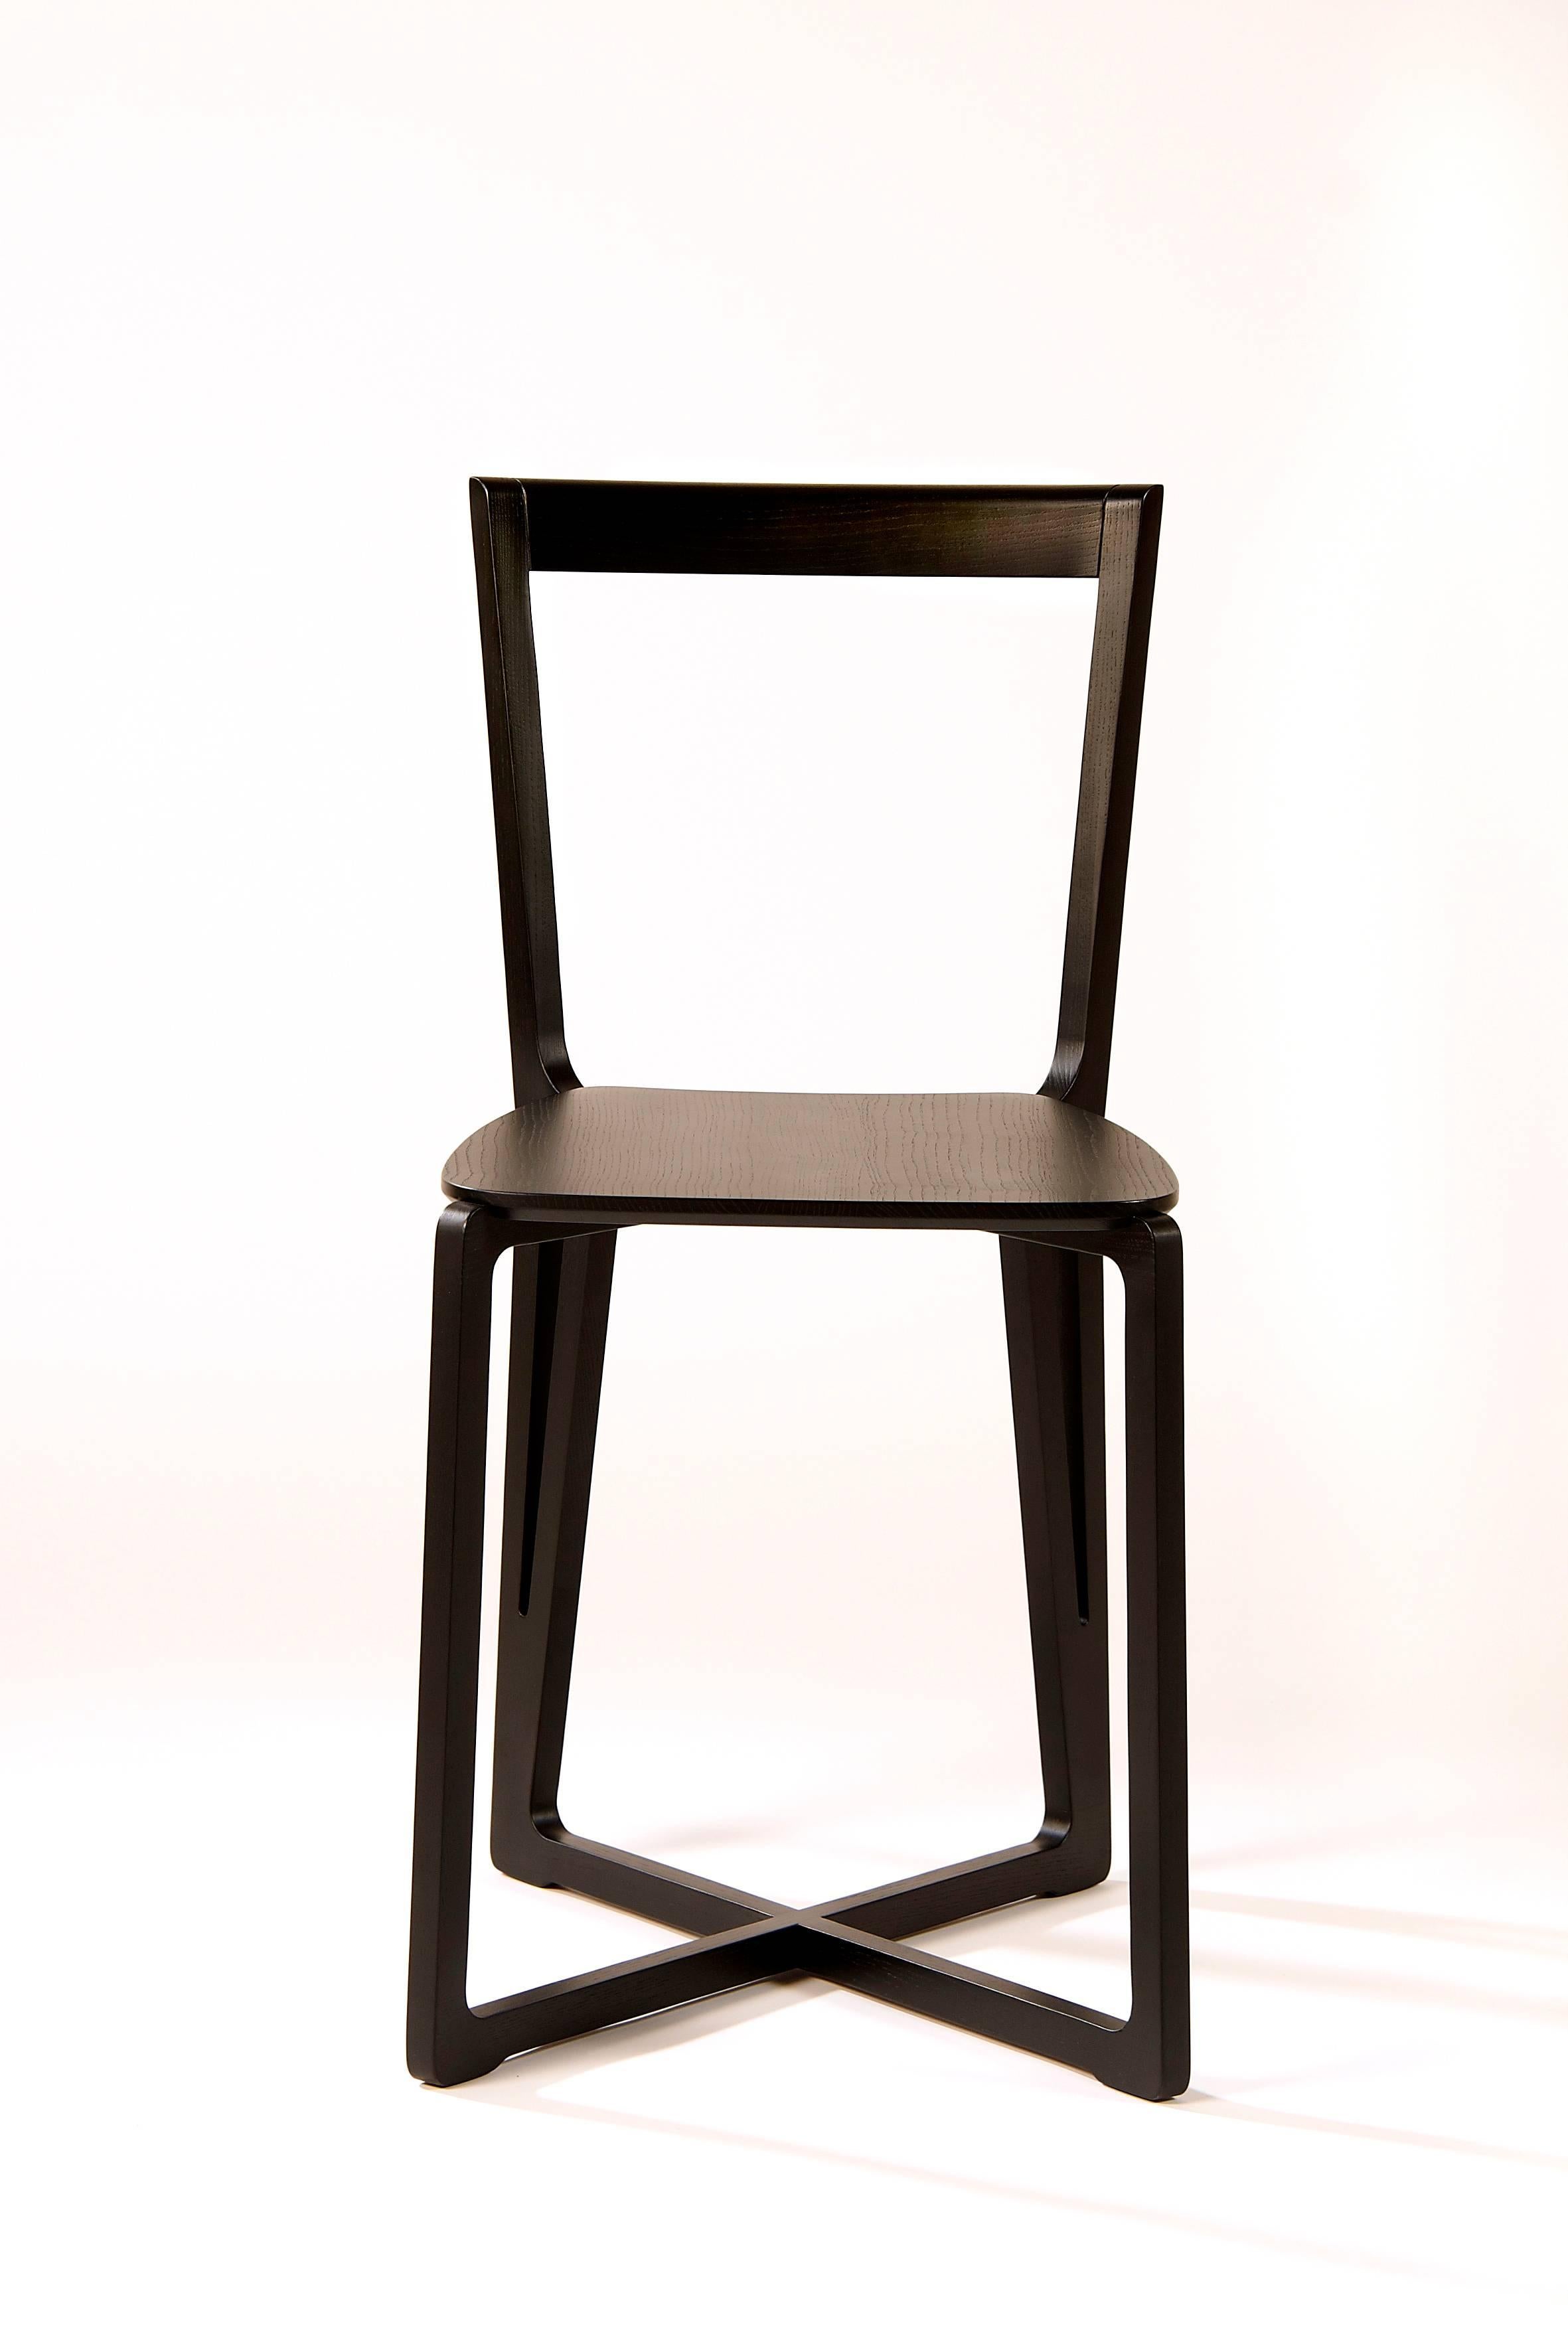 Modern H.E.A.D. Chair by Adentro Studio and F.Pozzi with Ashwood Black Stained For Sale